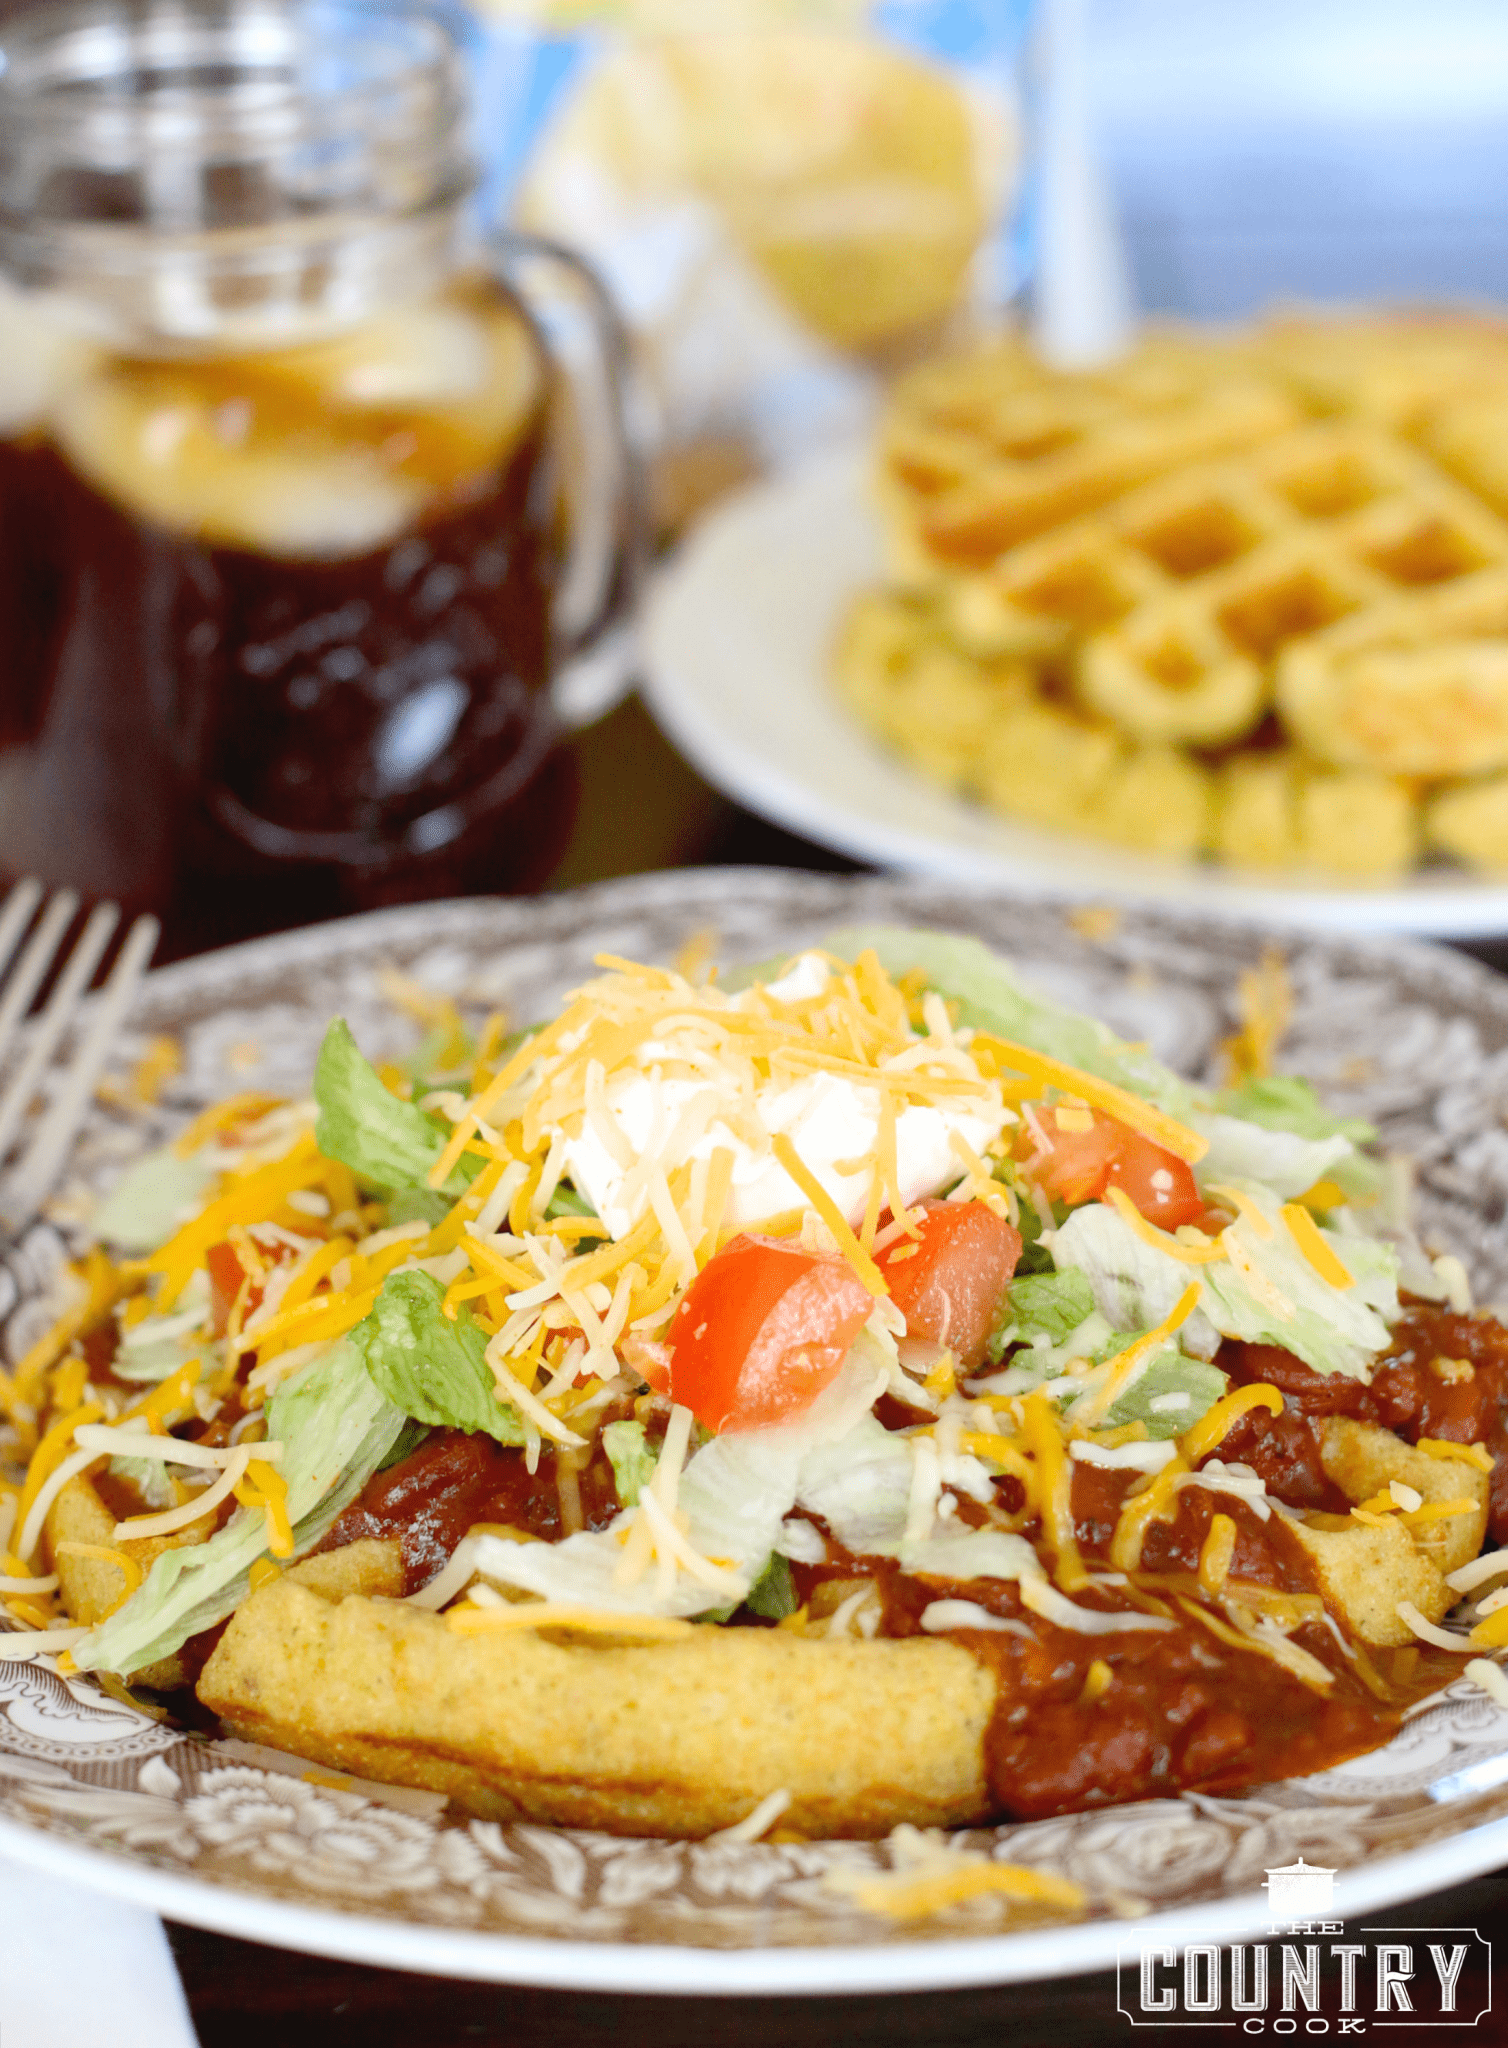 Cornbread Waffles with Chili and Fixins shown on a brown and white plate with a fork on the side. 